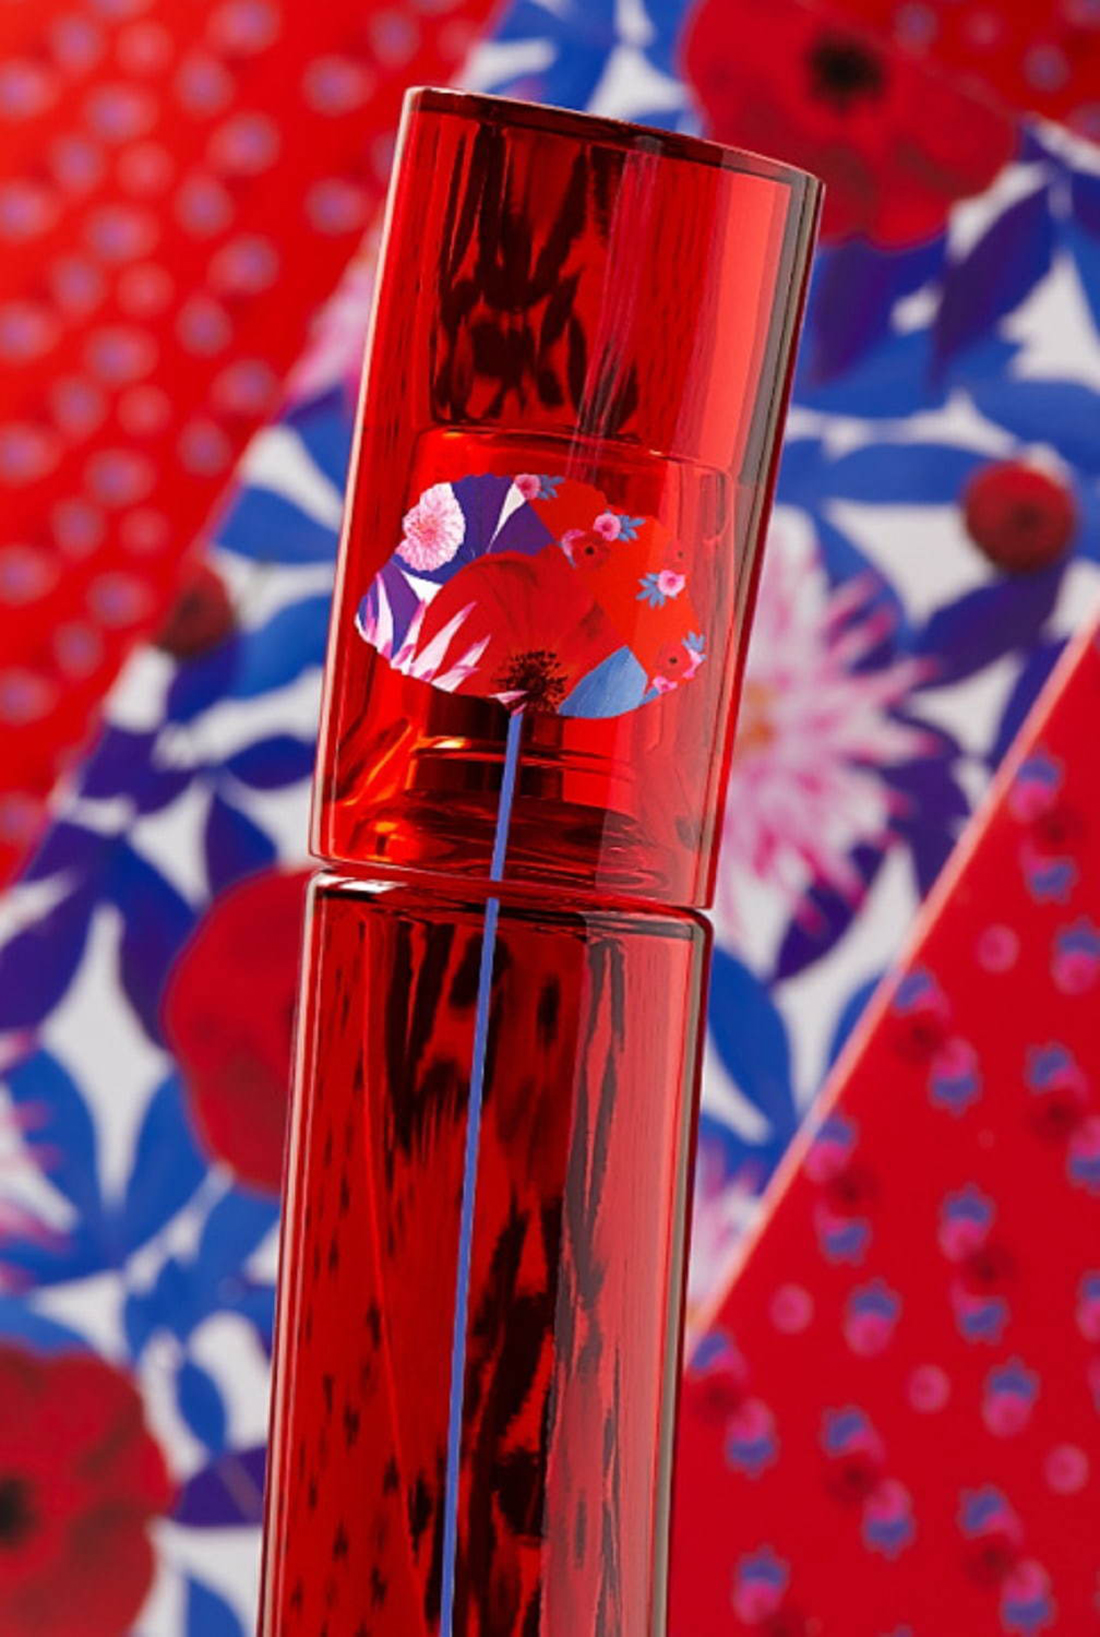 flower by kenzo red edition